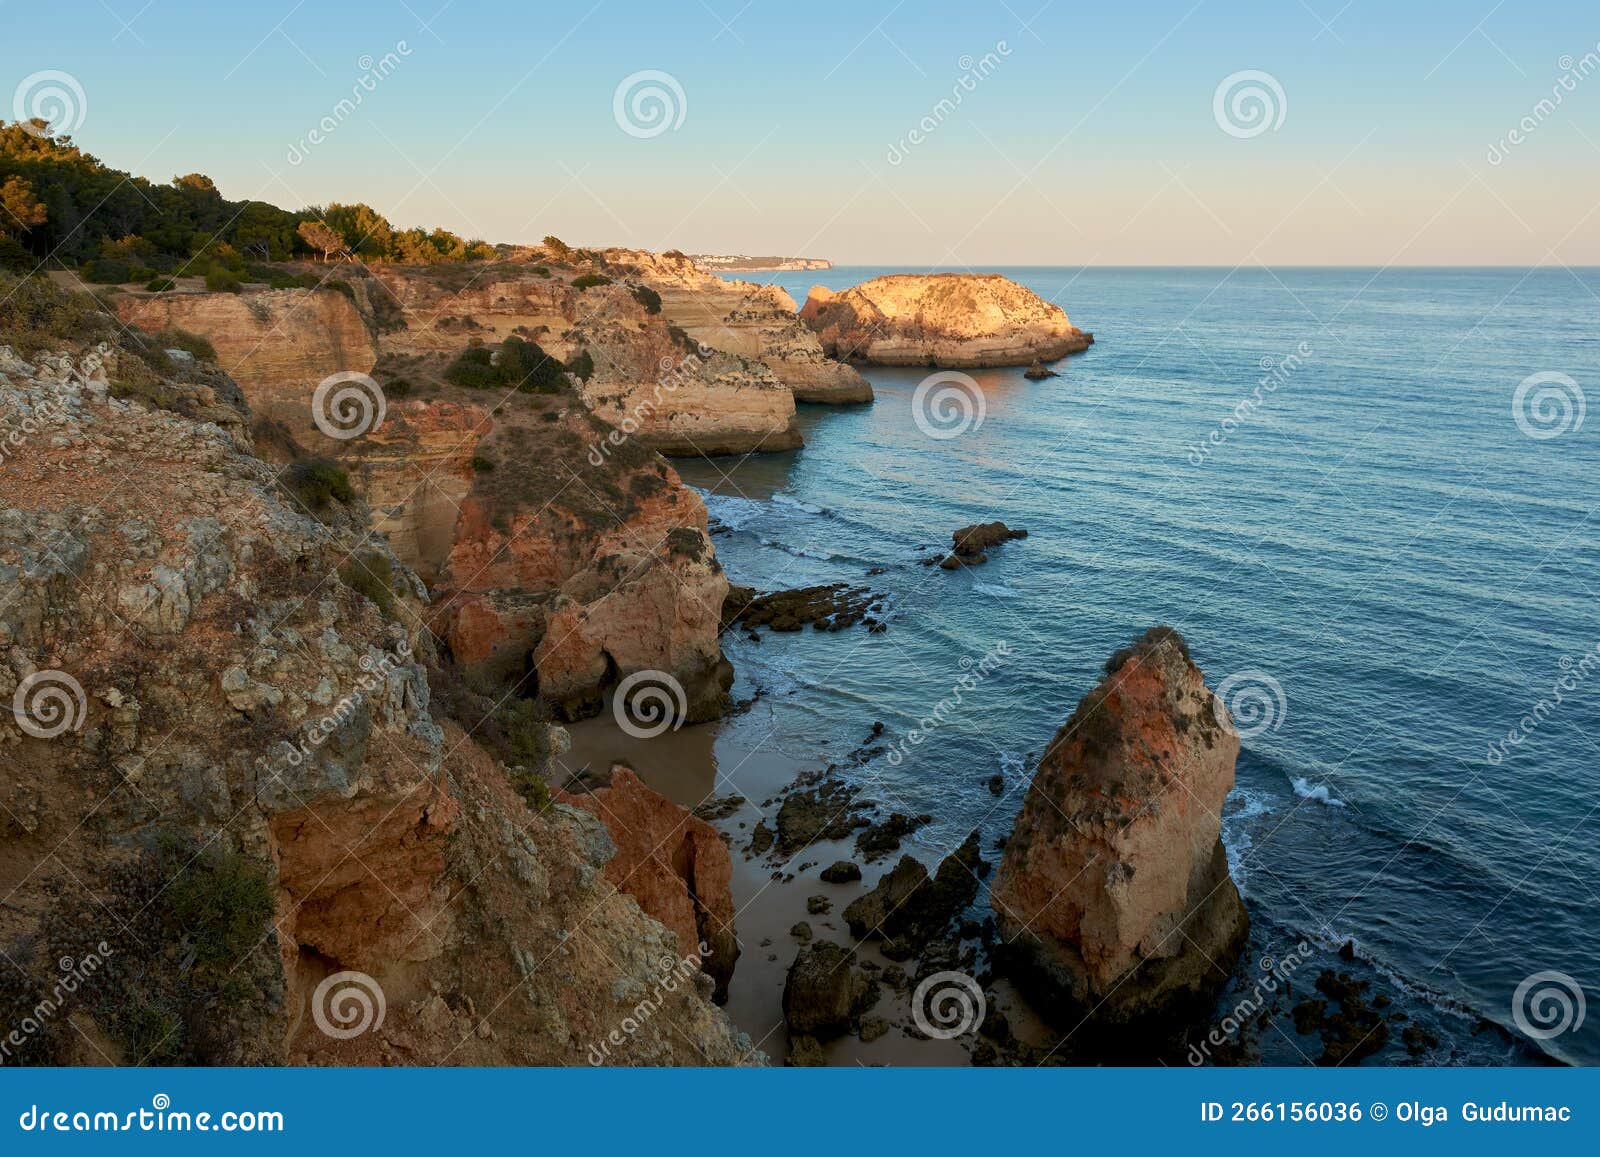 stunning sunset view of the secluded beach and colorful cliffs. algarve region, portugal